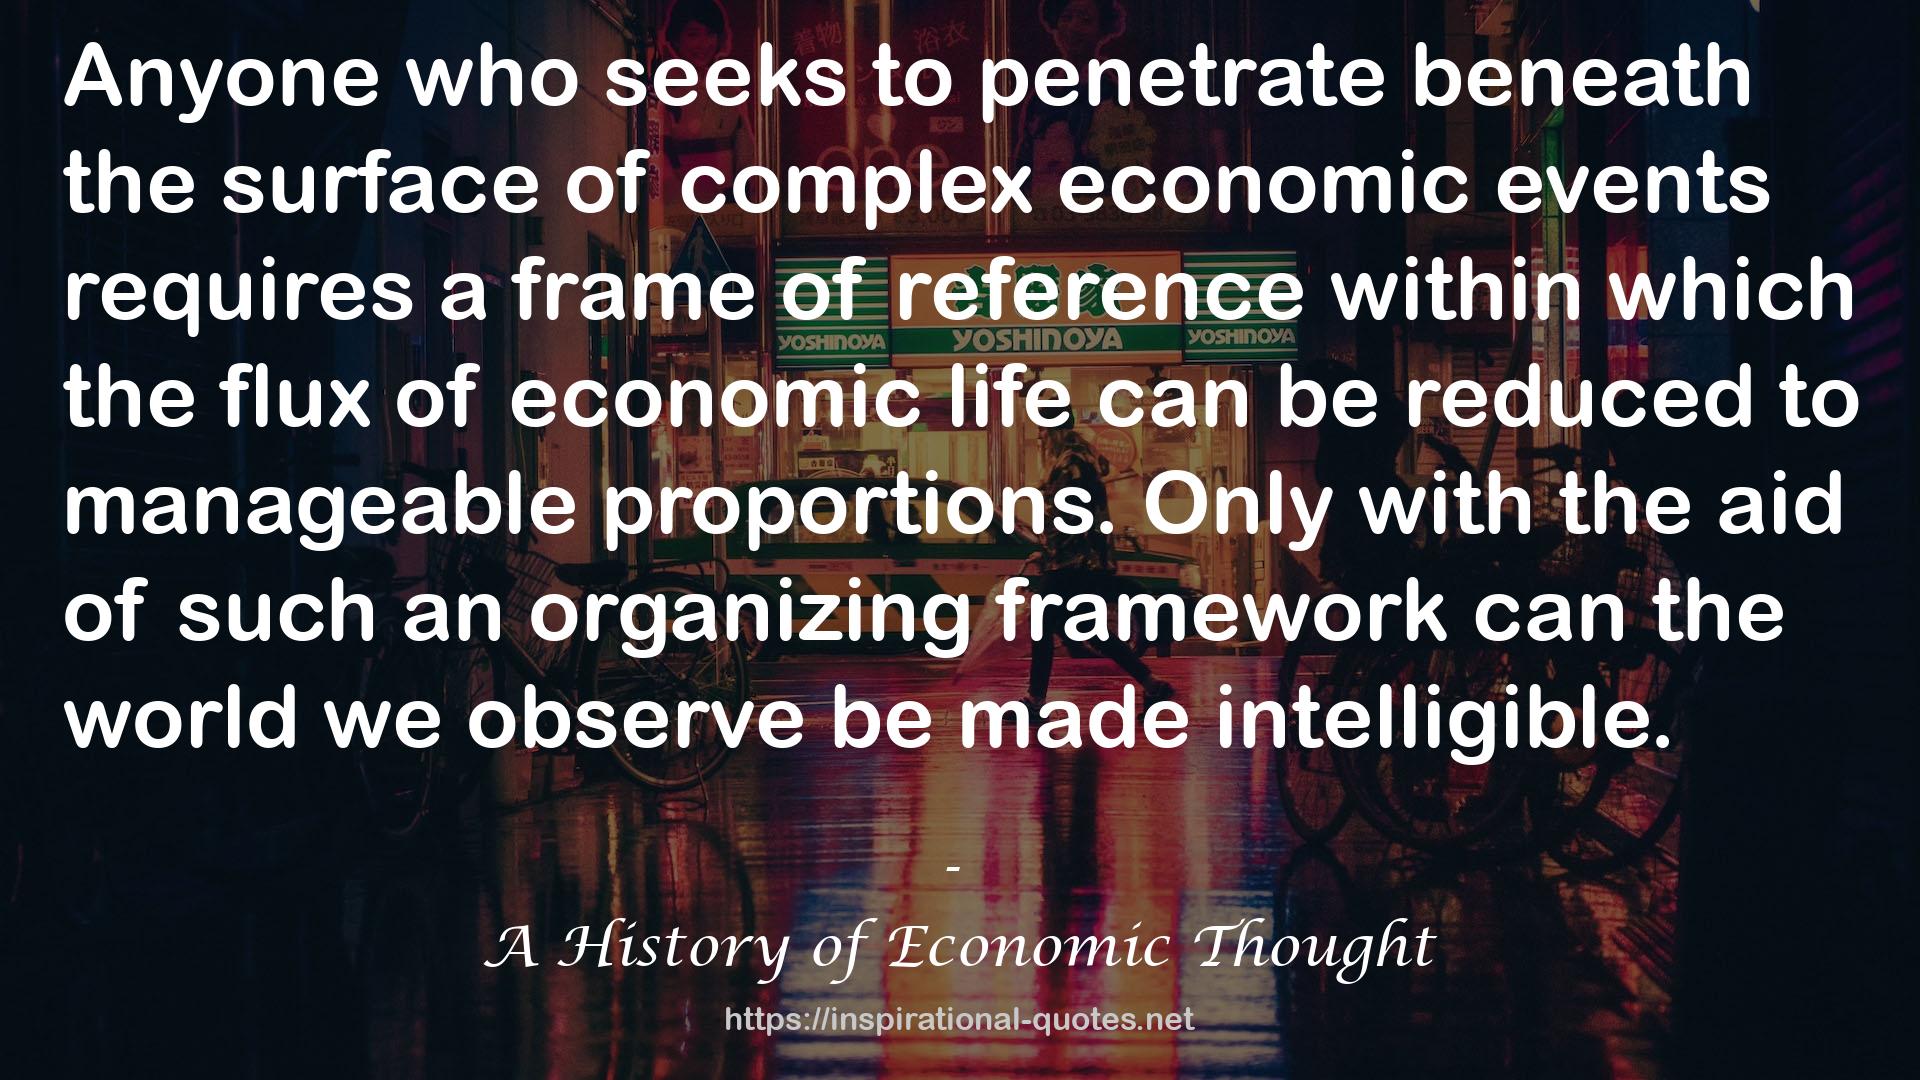 A History of Economic Thought QUOTES